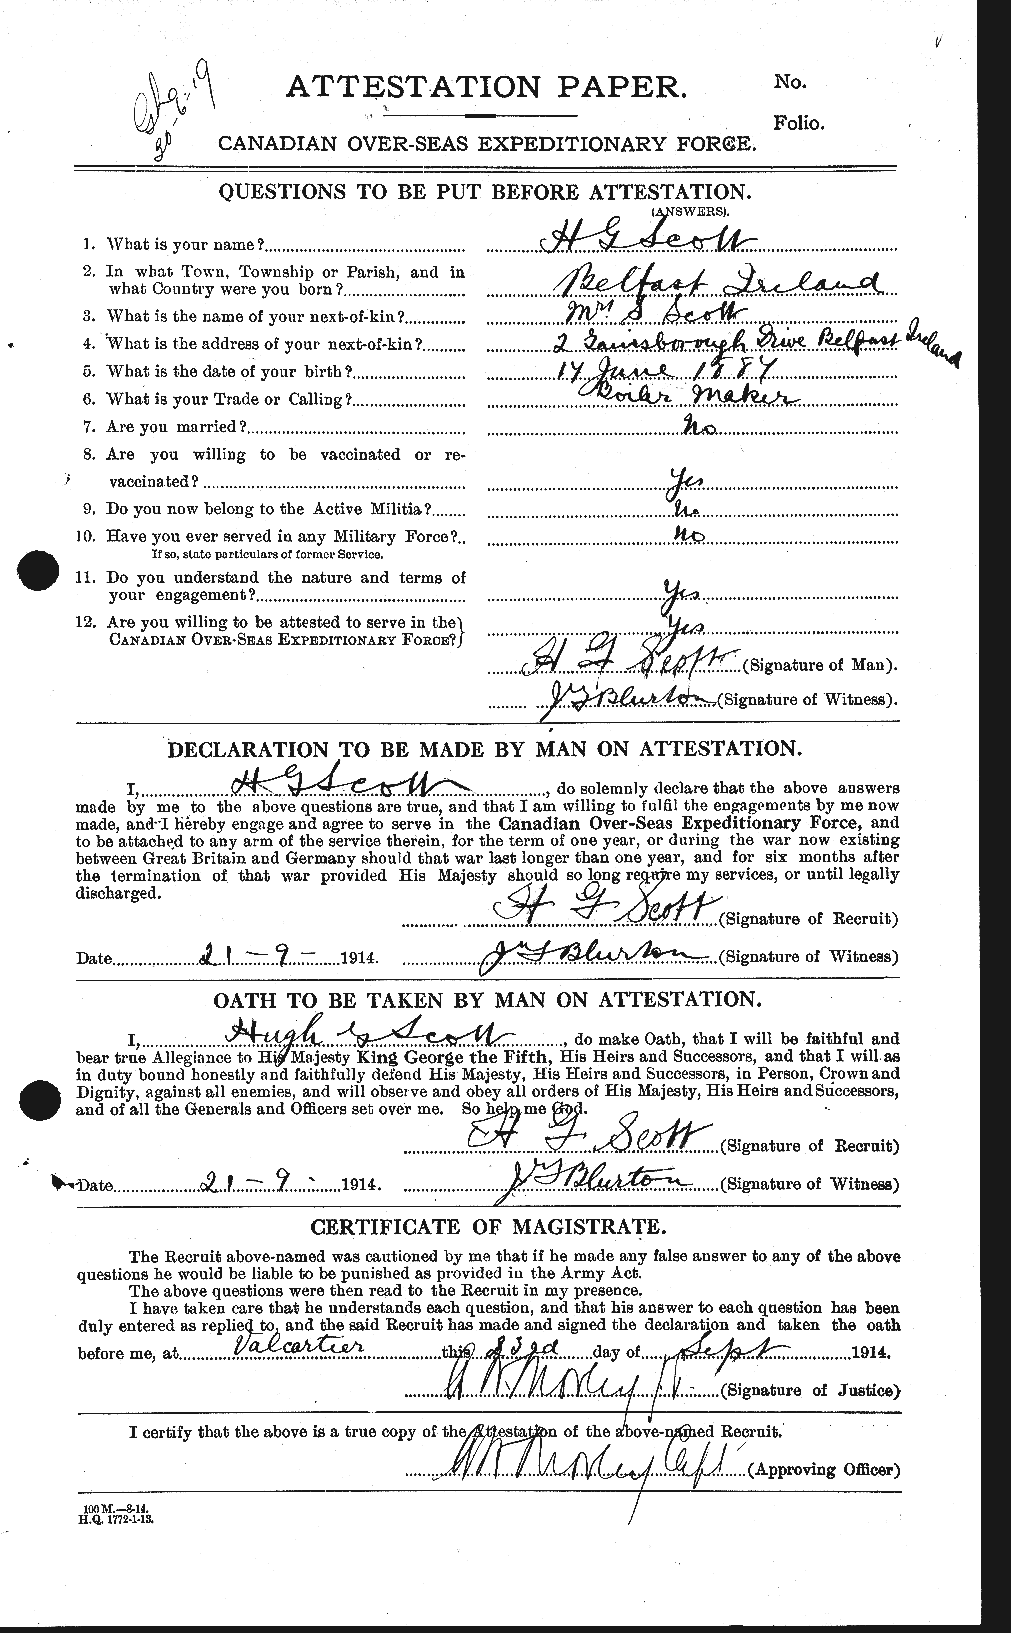 Personnel Records of the First World War - CEF 086508a